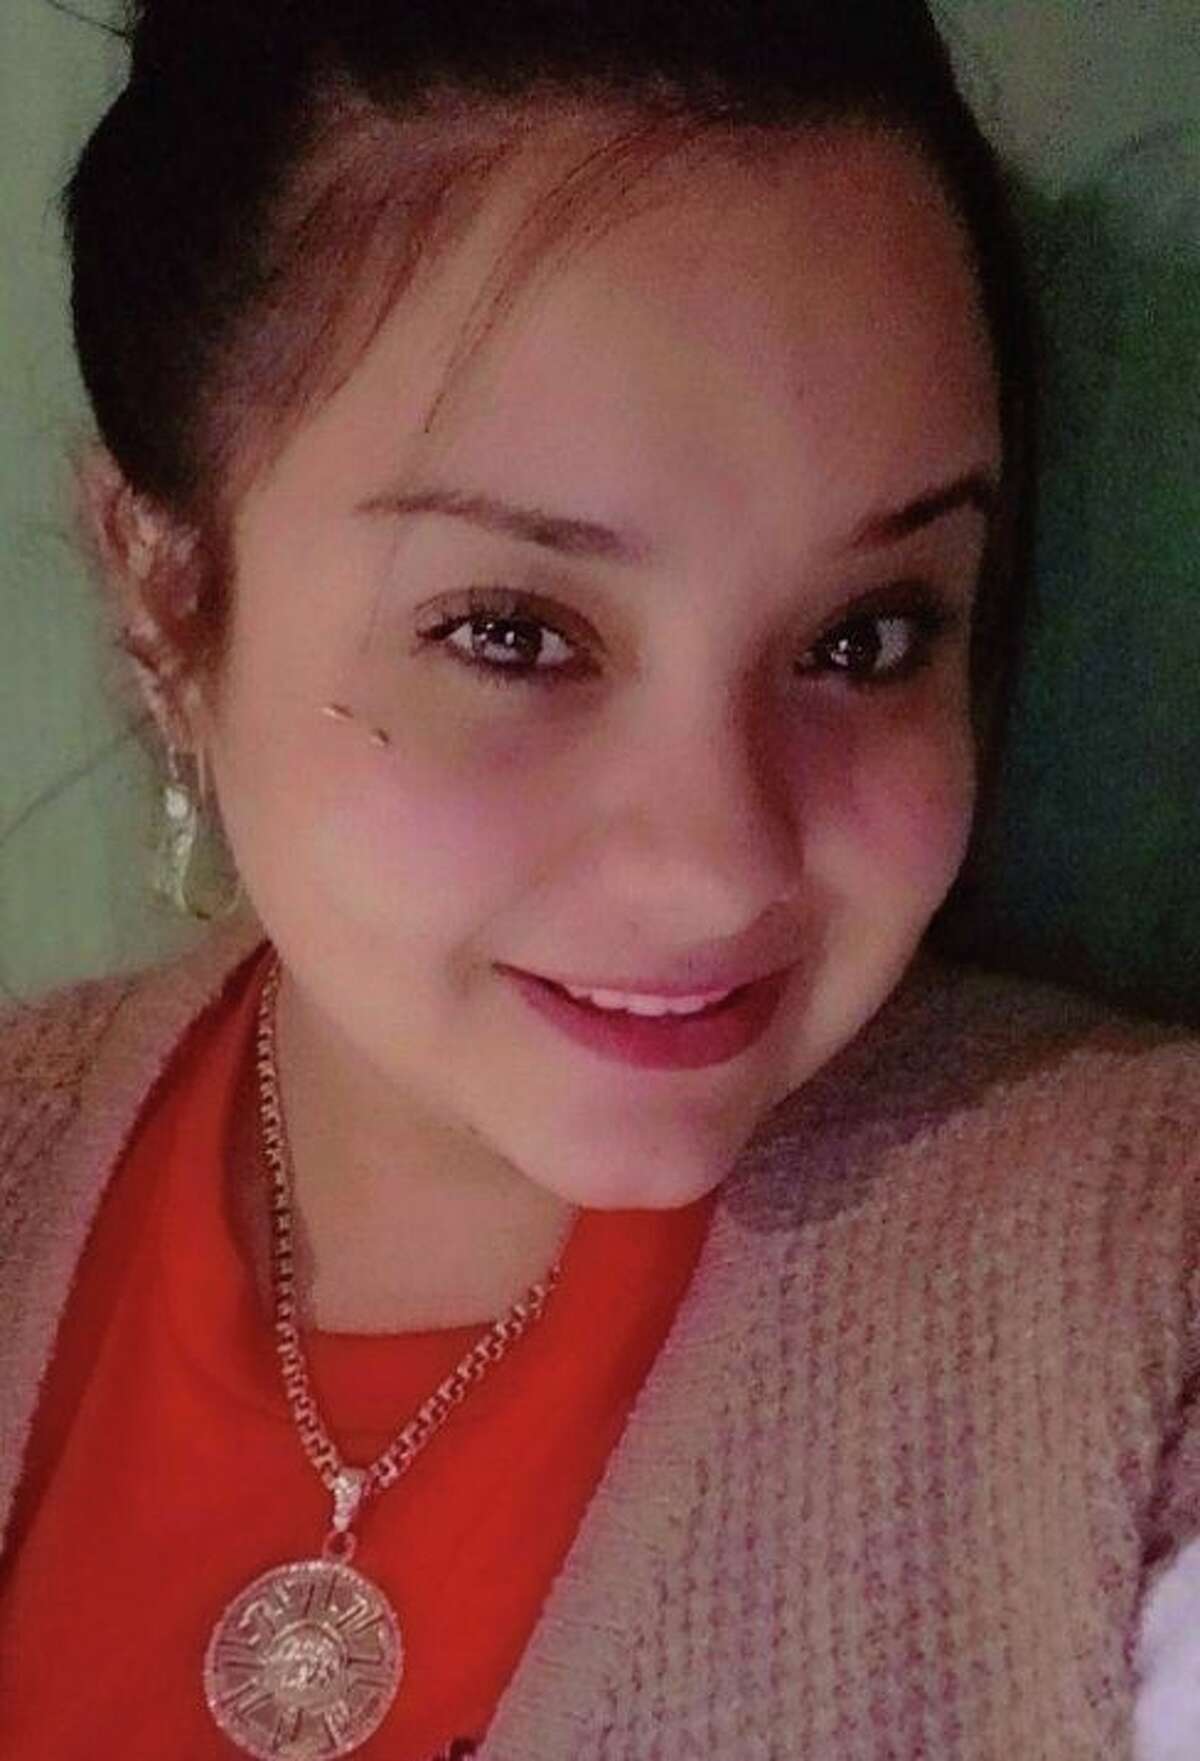 Krystal Claudina Limon was pronounced dead on Saturday, Jan. 14, 2023 by the Laredo Police Department. She died Jan. 9 after allegedly being shot in the face by her husband on Jan. 7, 2023.